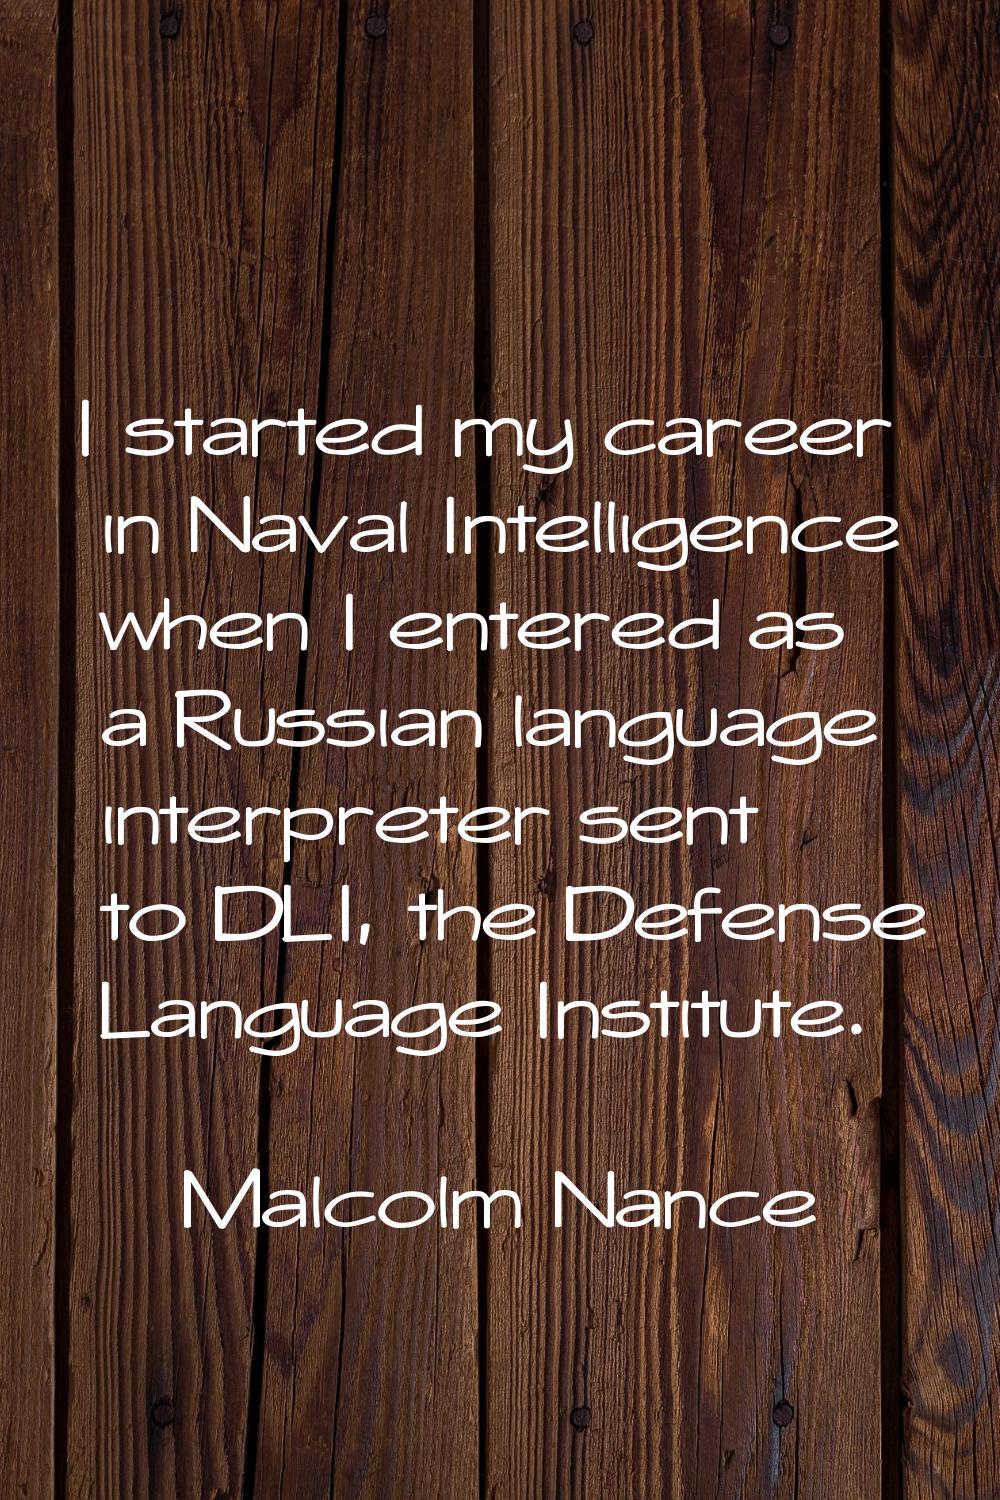 I started my career in Naval Intelligence when I entered as a Russian language interpreter sent to 